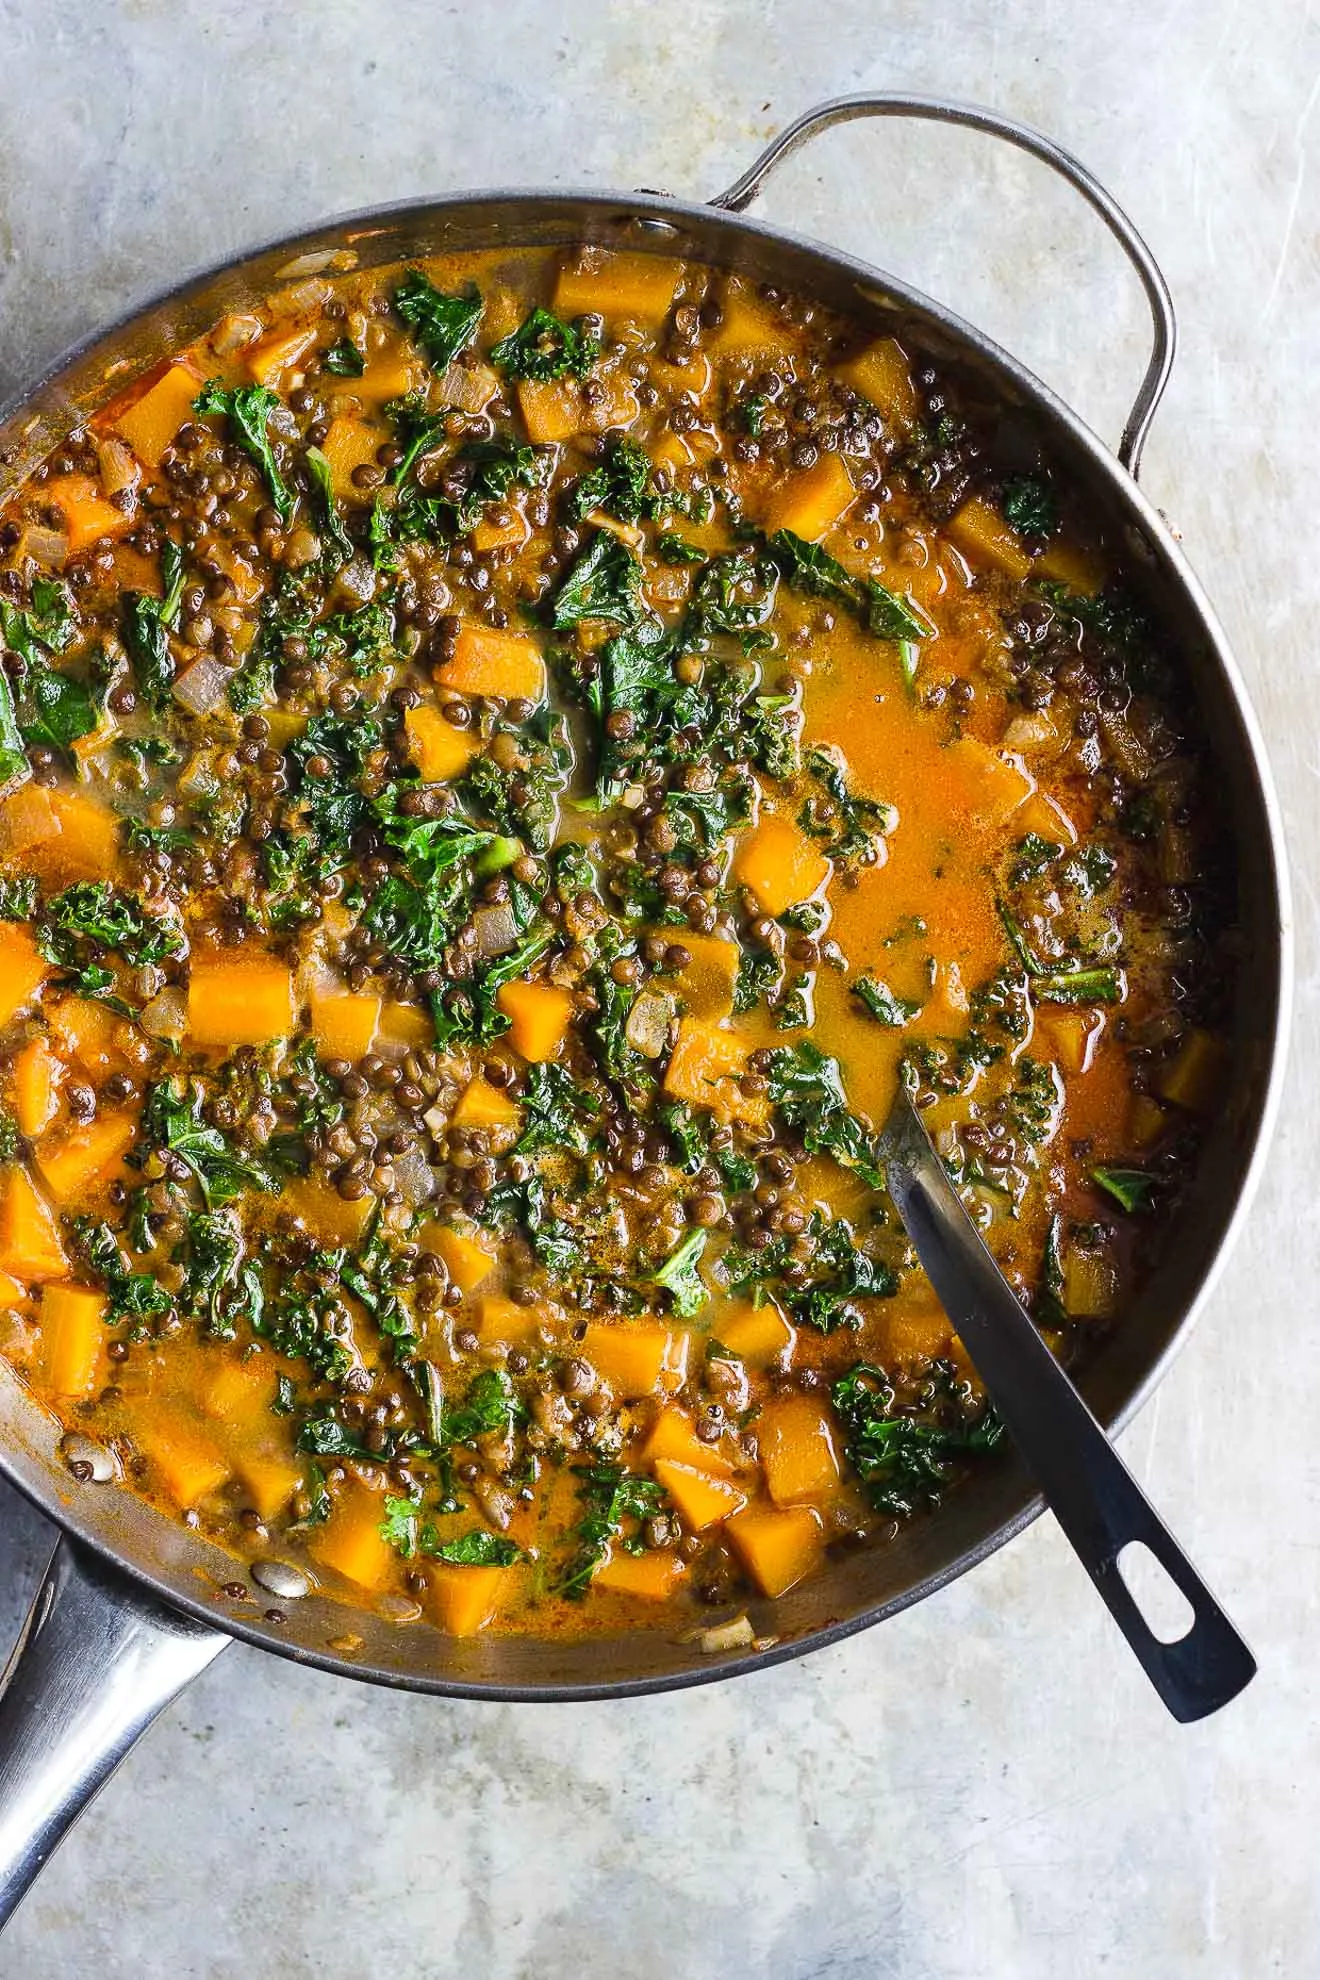 Red Curry Lentil Stew with Butternut Squash + Kale | Red curry lentil stew with butternut squash, kale and creamy coconut milk. It's naturally gluten-free and vegan. It's a hearty fall lentil stew. #butternutsquashrecipes #fallstew #lentilstew